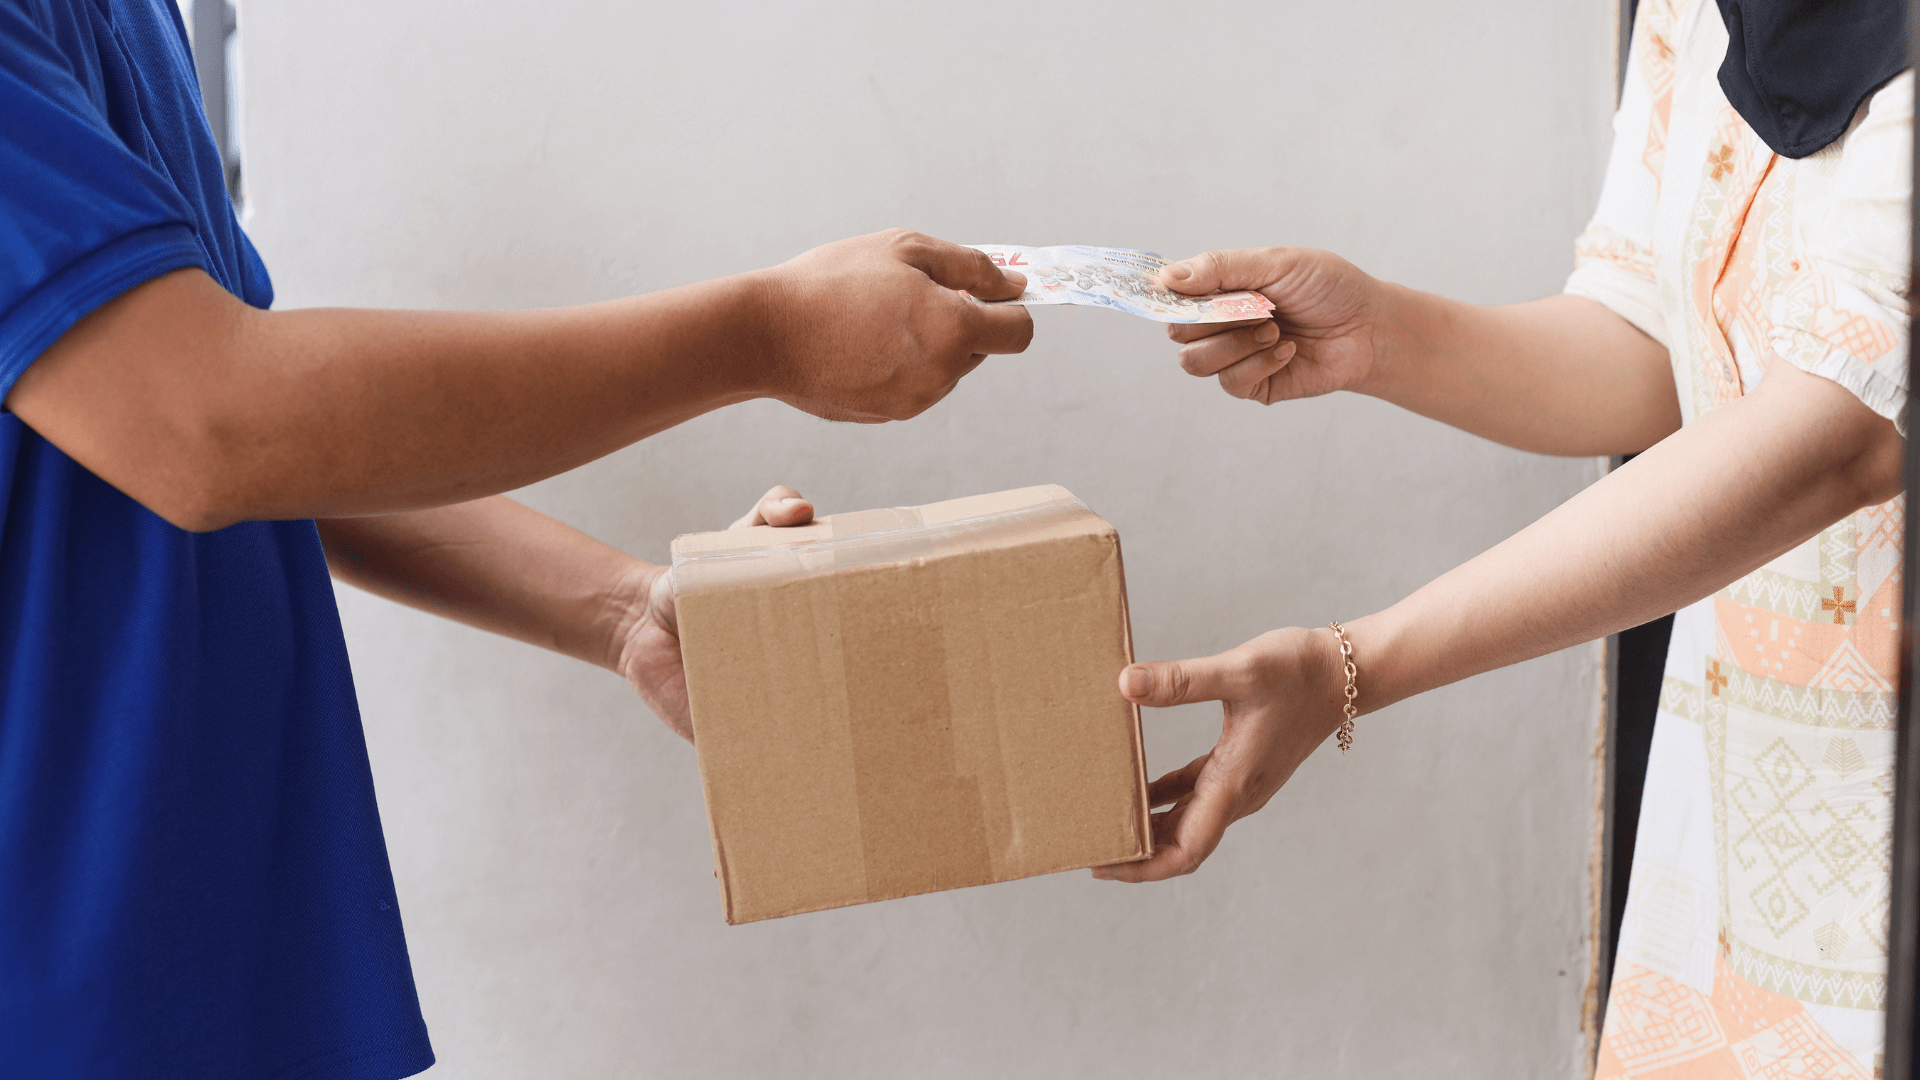 Cash-on-Delivery - What to Consider as an E-commerce Company